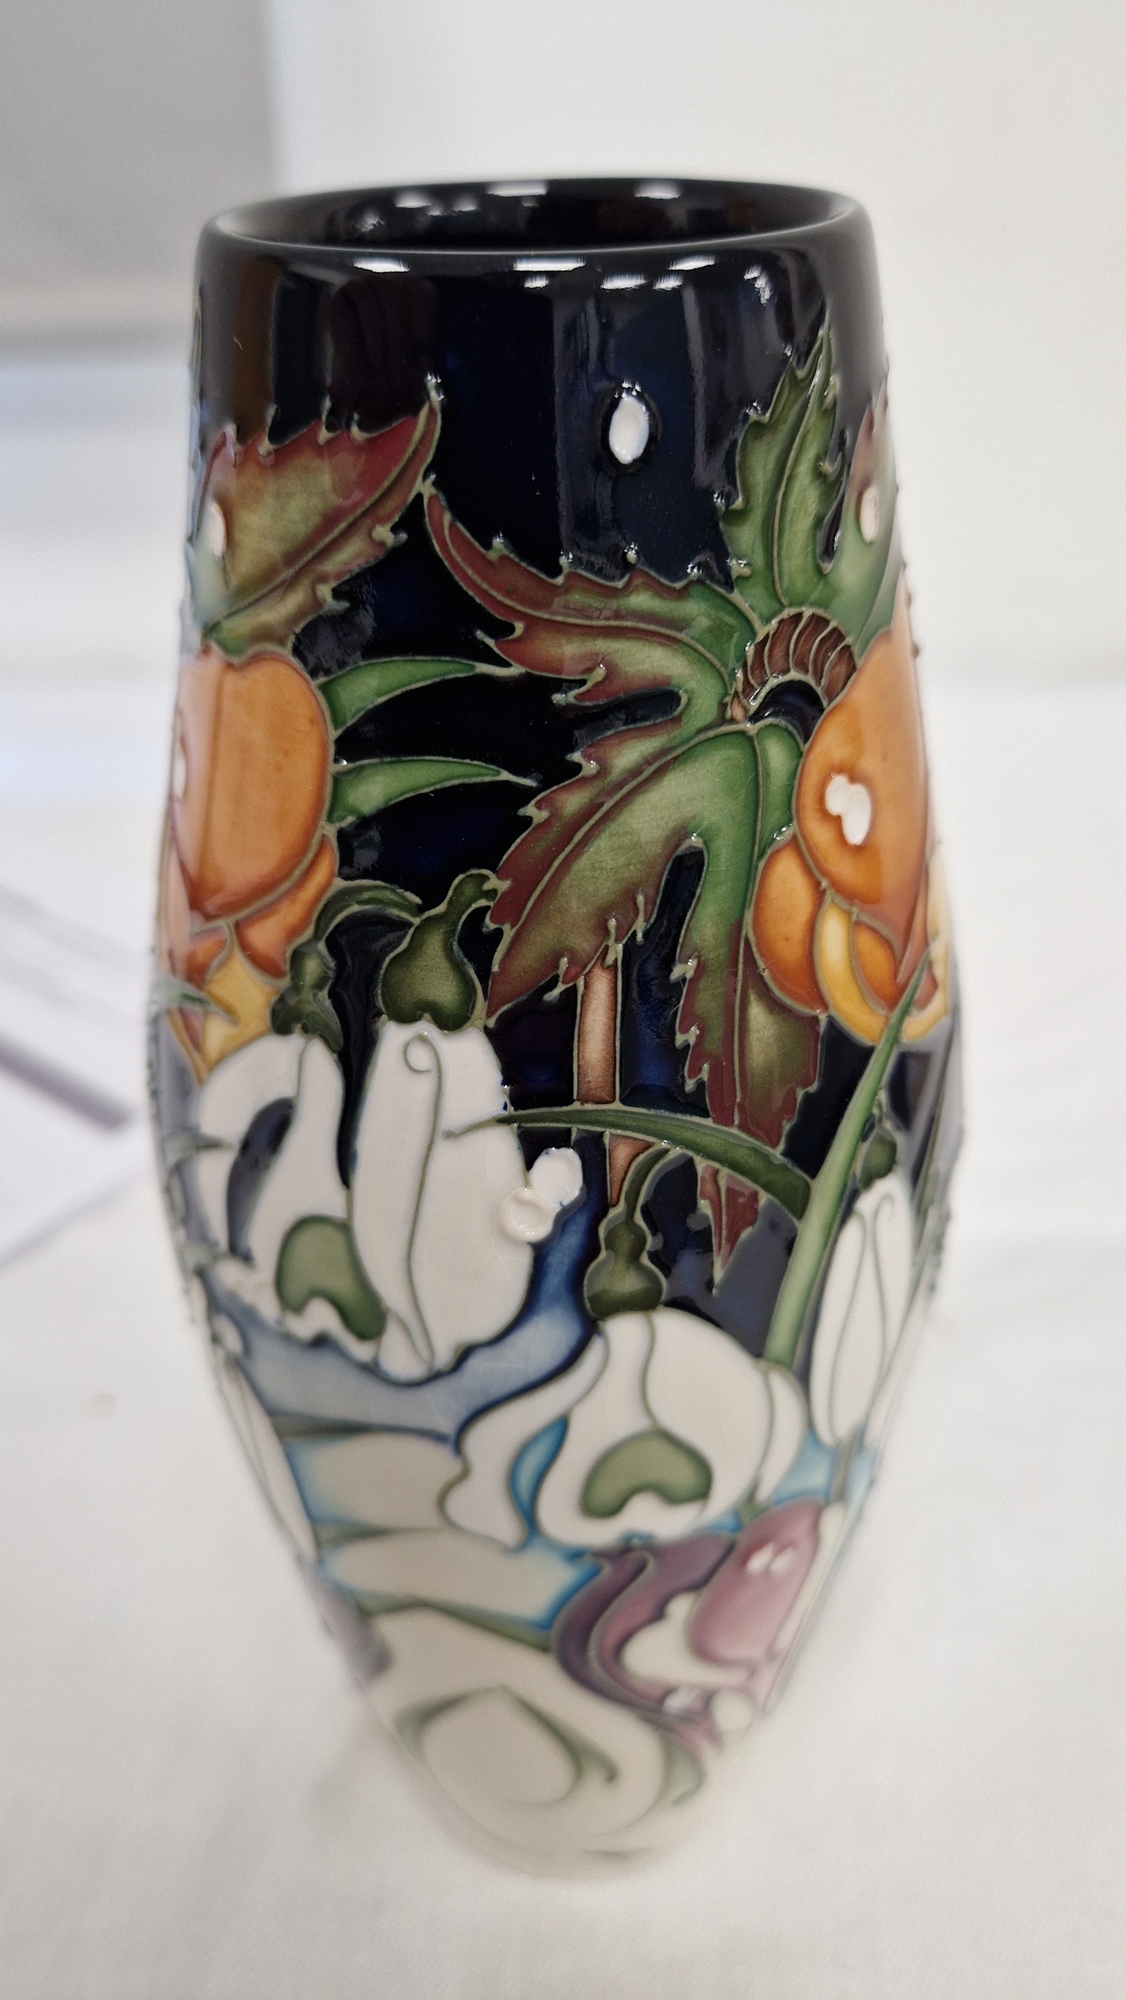 Moorcroft Snow Time pattern tapered baluster vase by Emma Bossons, printed and impressed marks, - Image 22 of 22